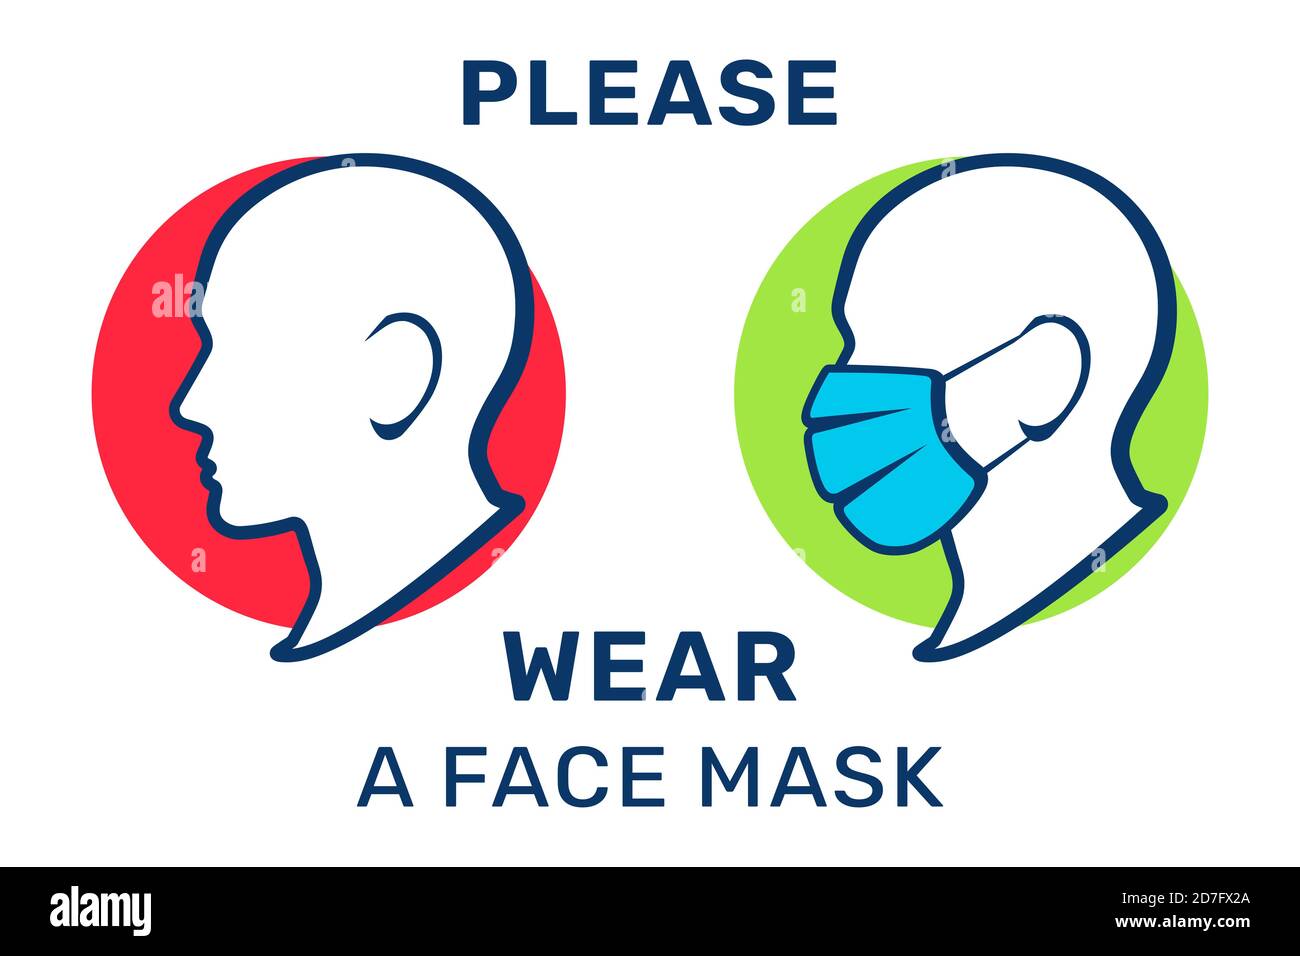 Please wear a face mask, vector illustration. Mask required, warning sign. Silhouette of a human's head in a medical mask Stock Vector